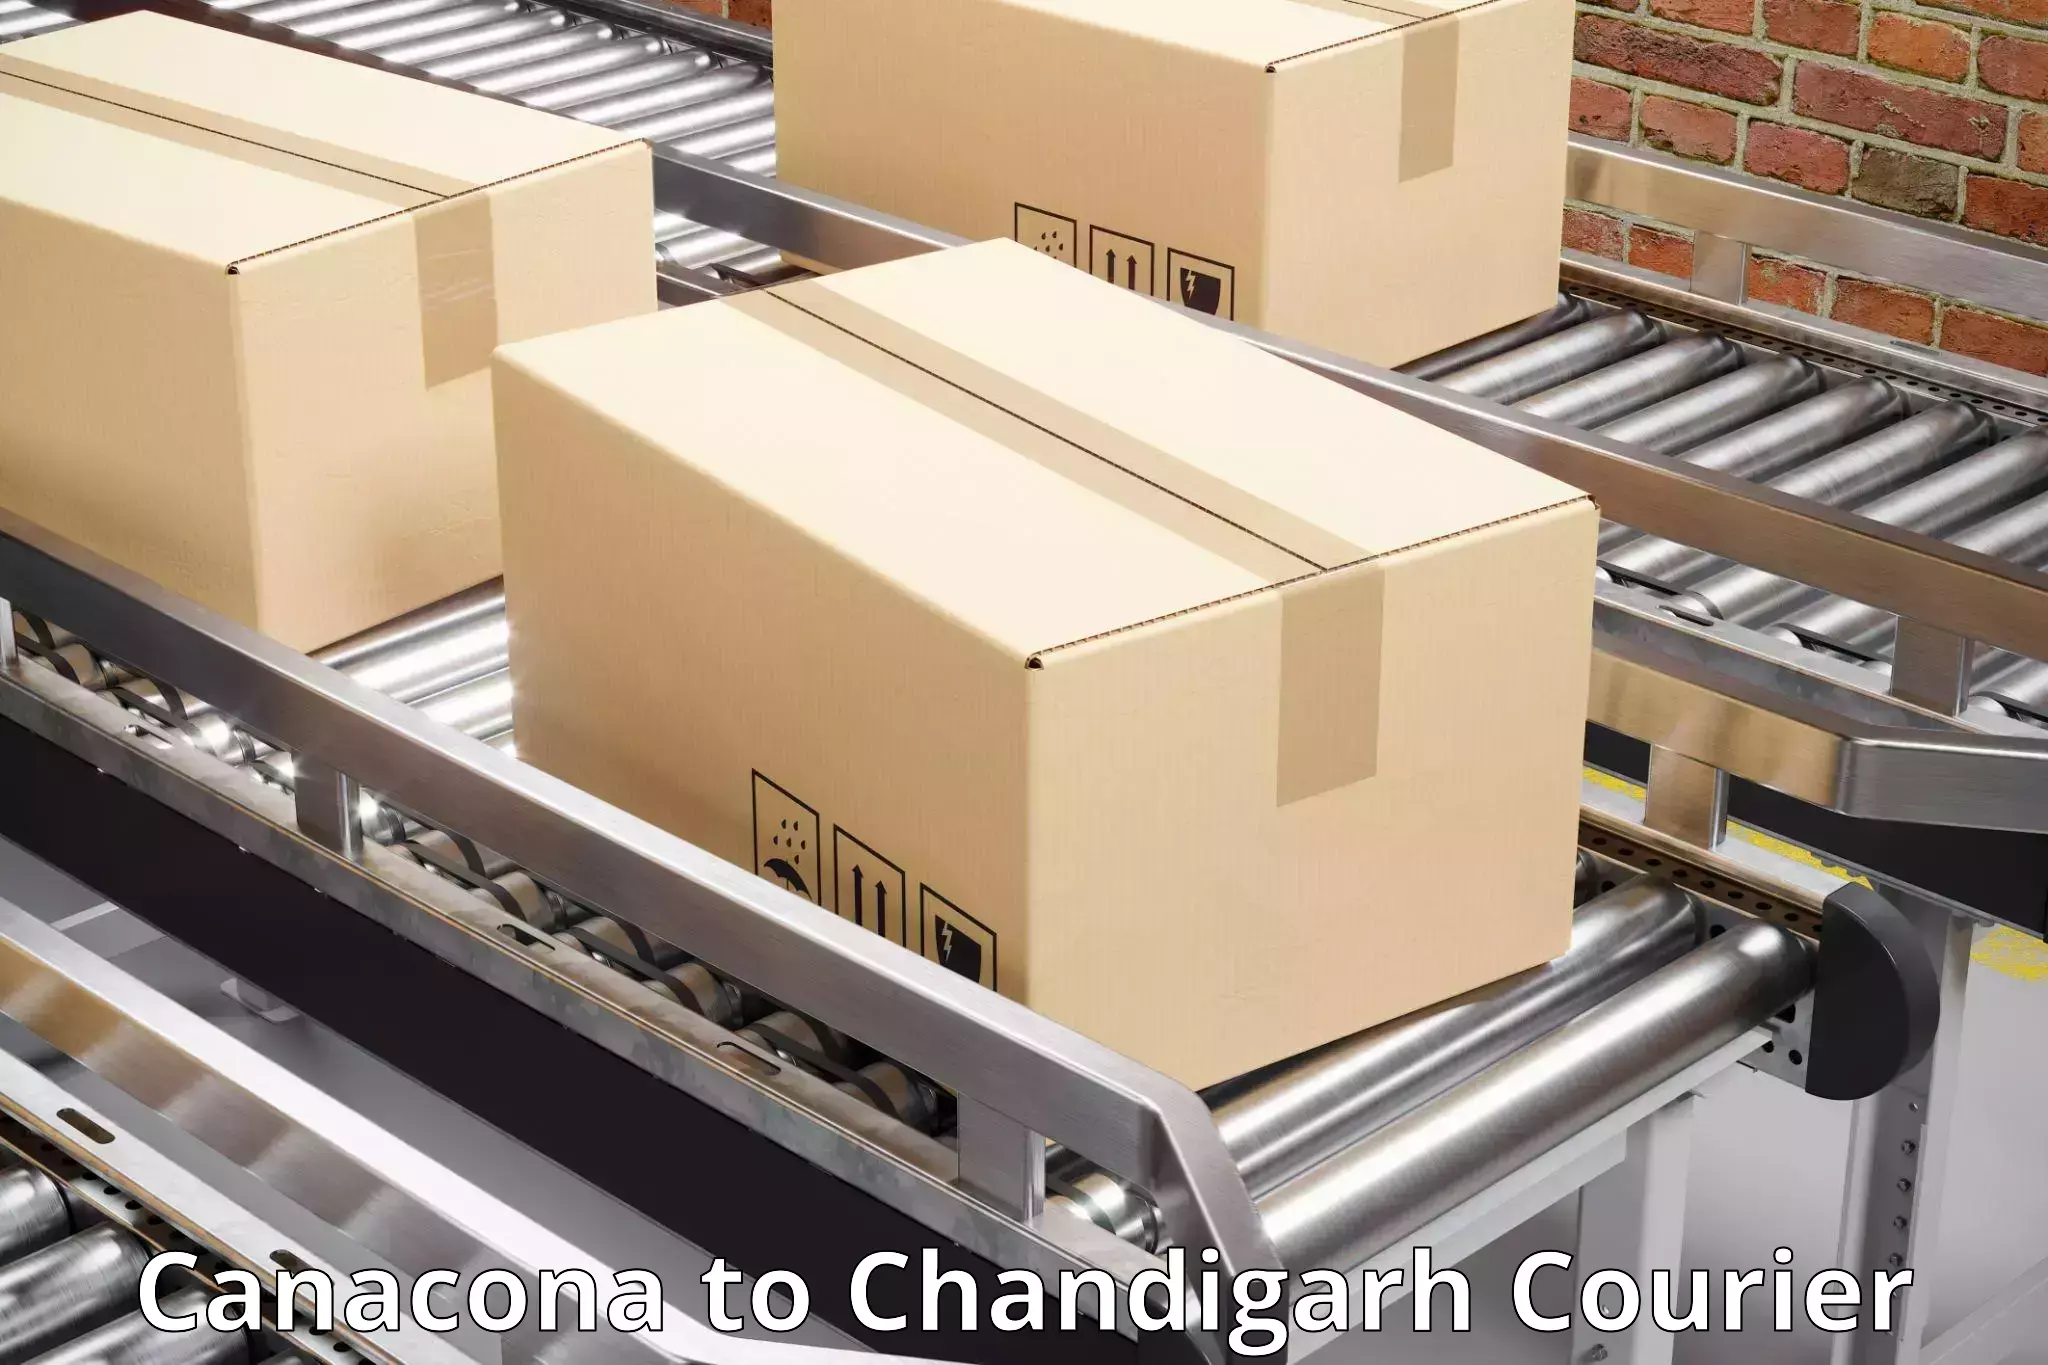 Sustainable shipping practices Canacona to Chandigarh